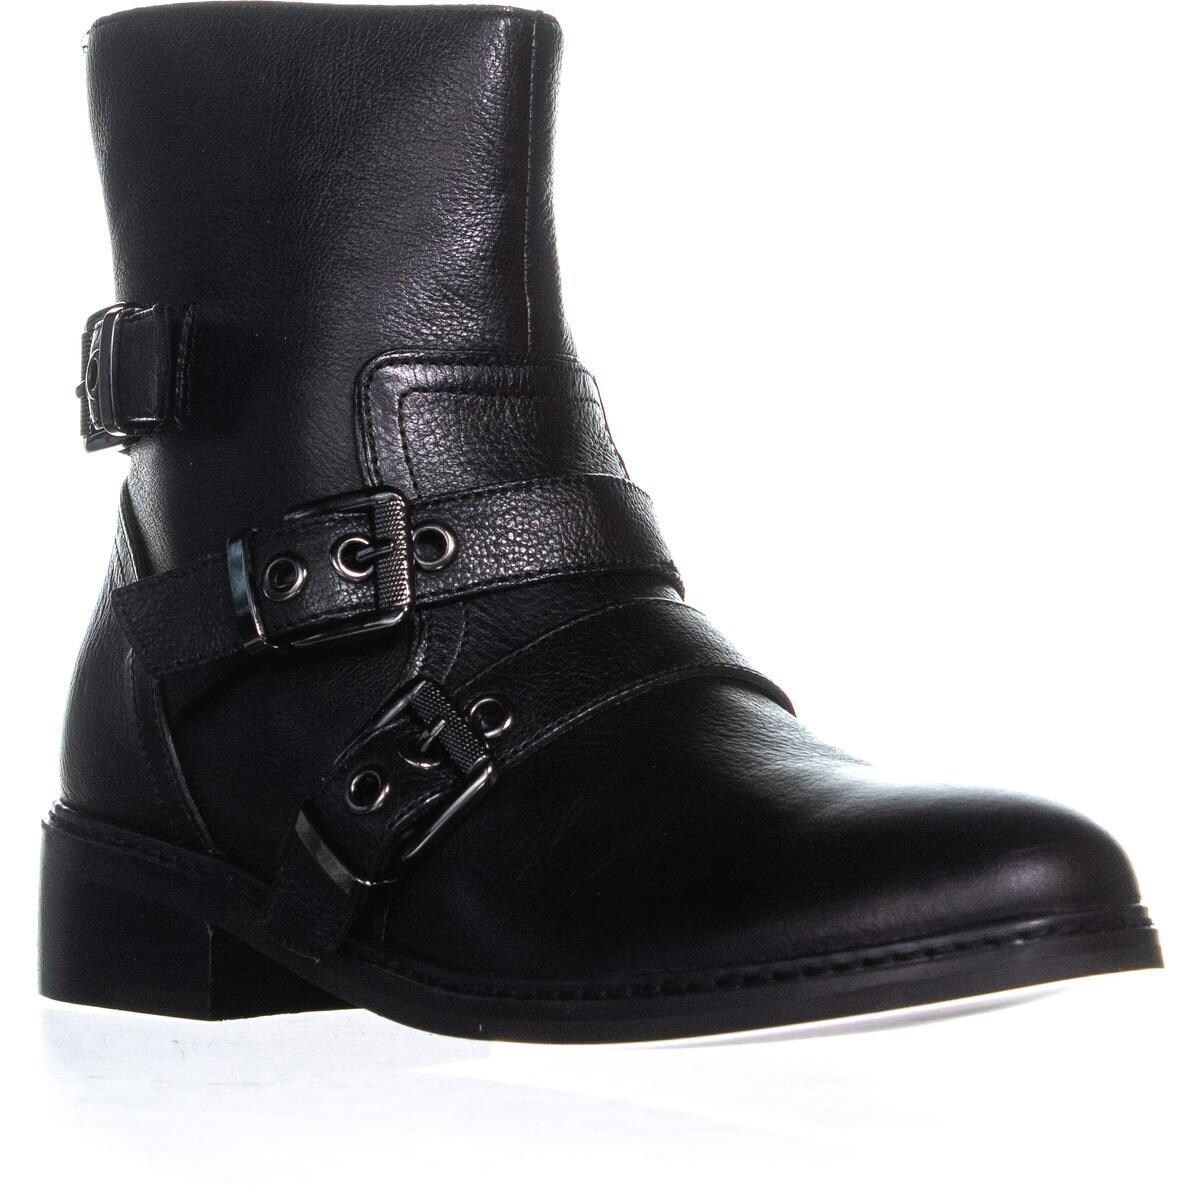 kendall and kylie nori boot